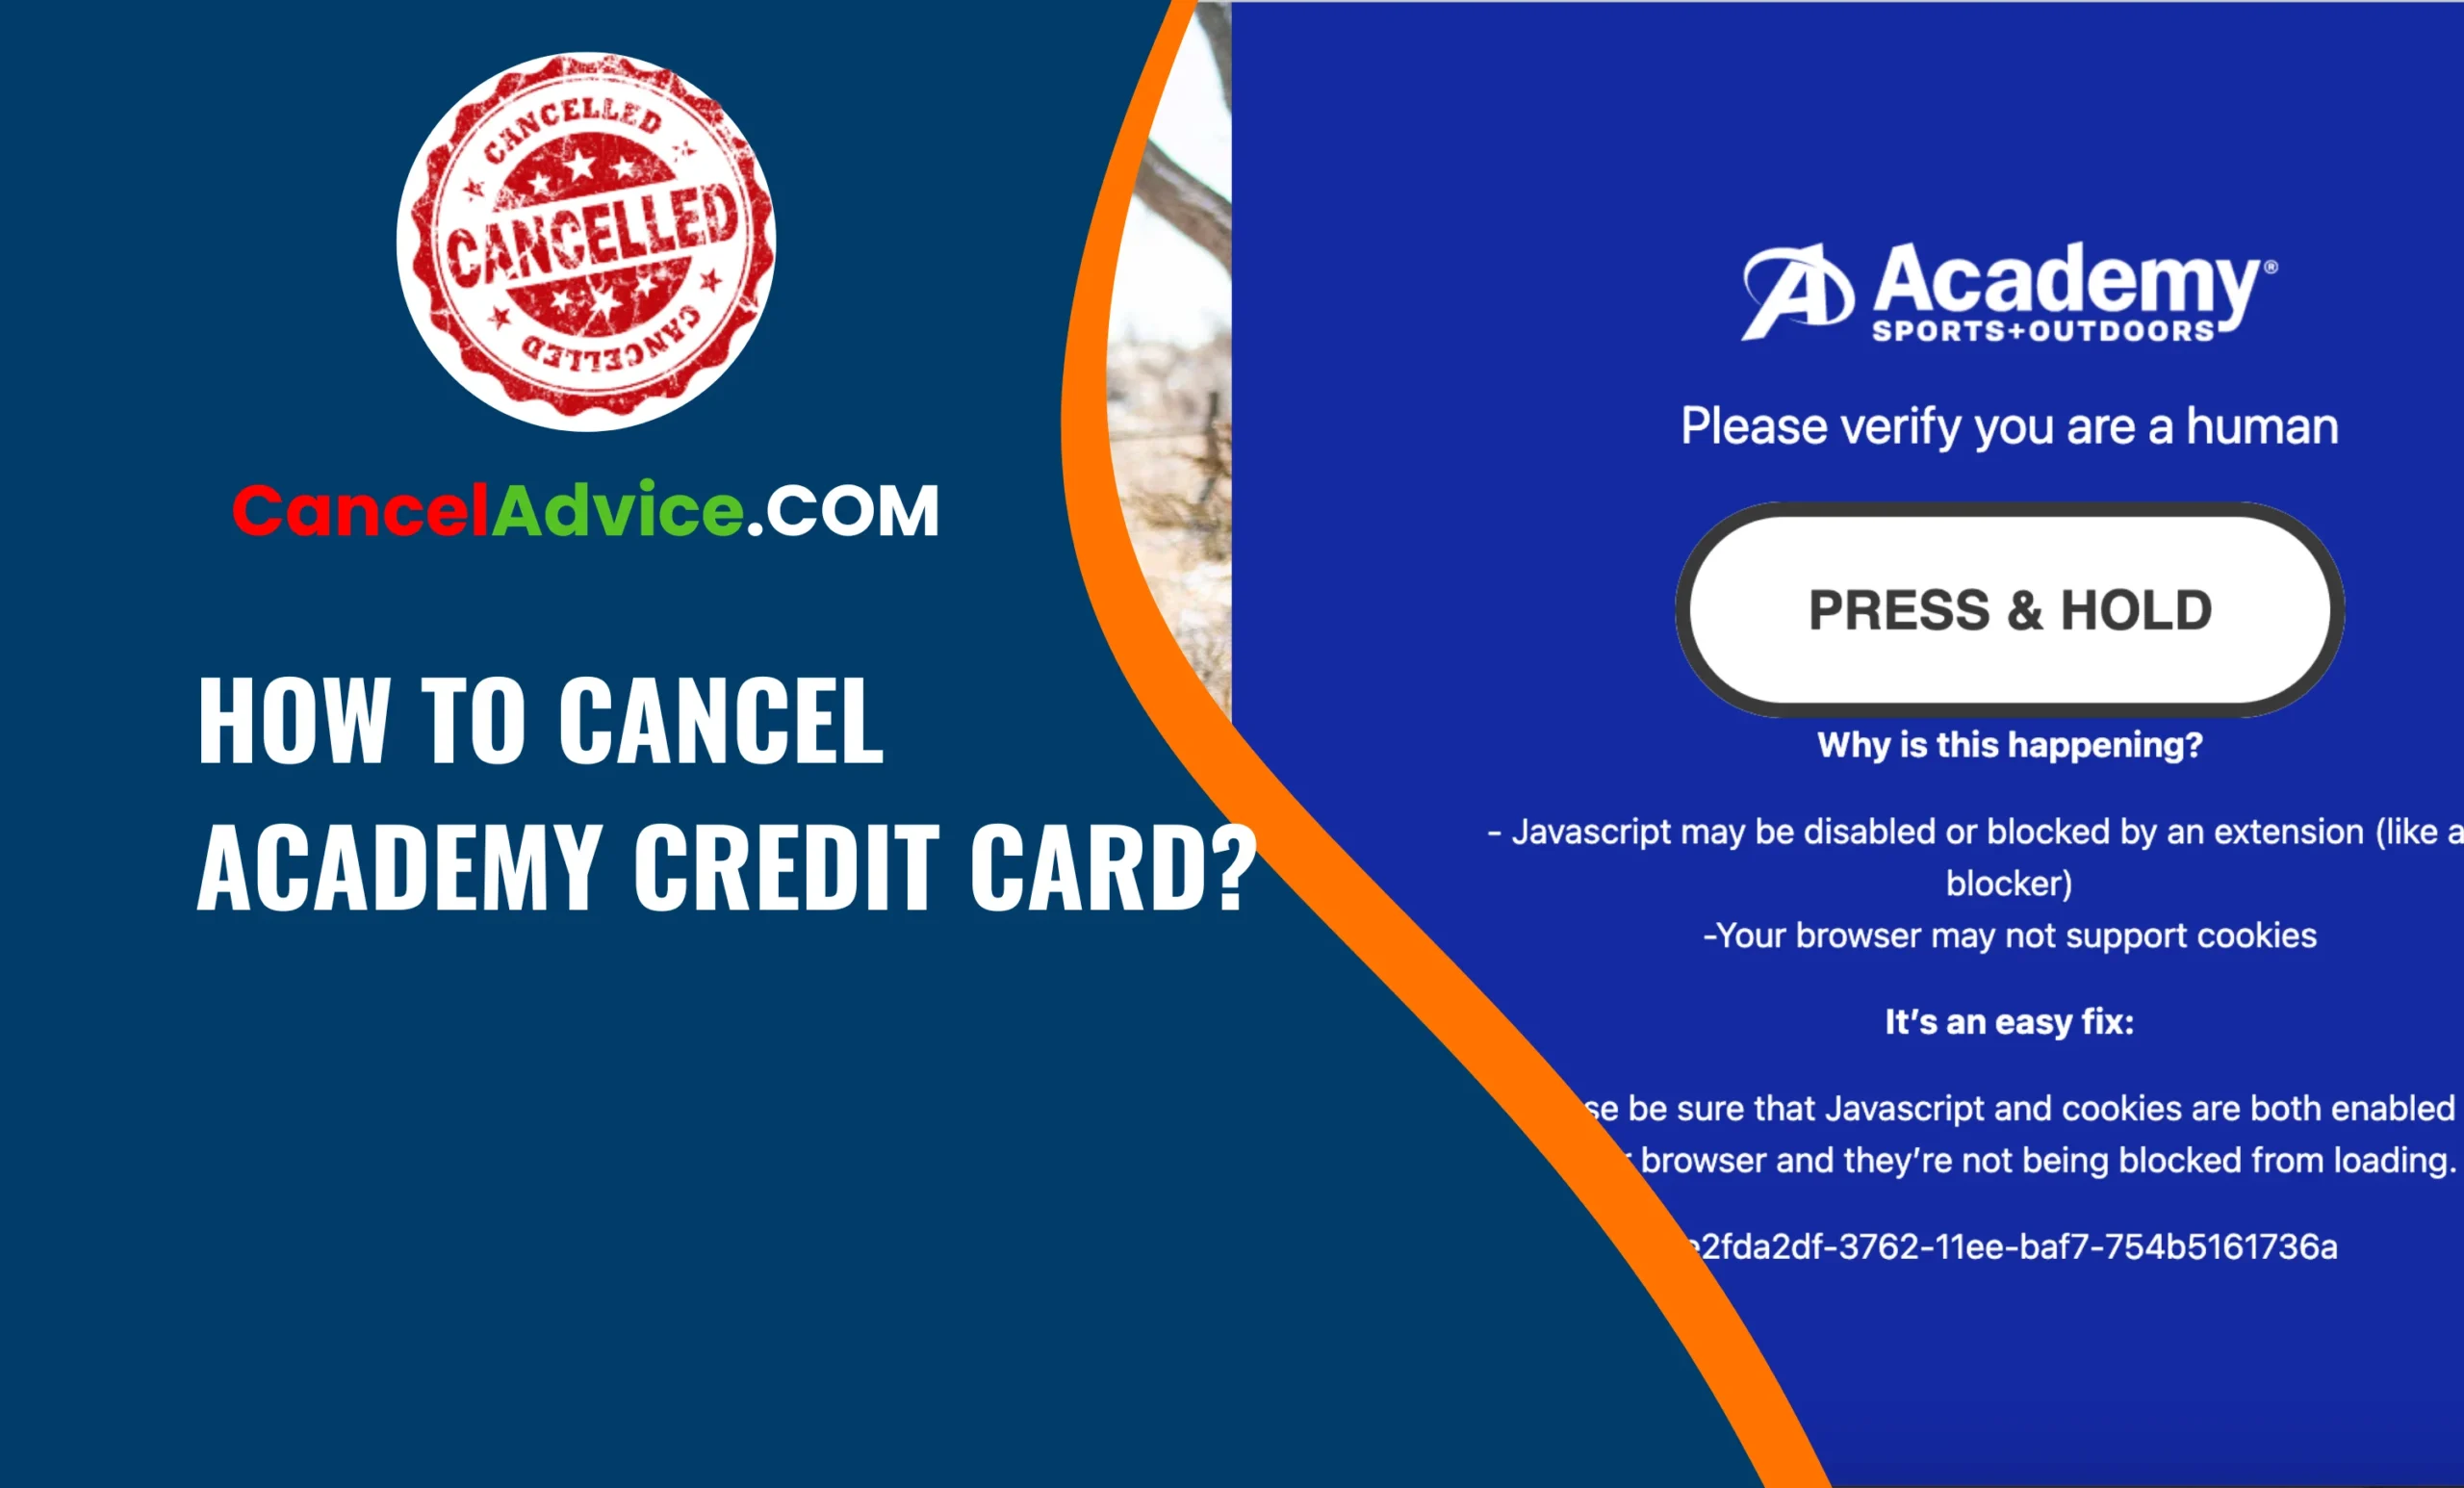 How To Cancel Academy Credit Card